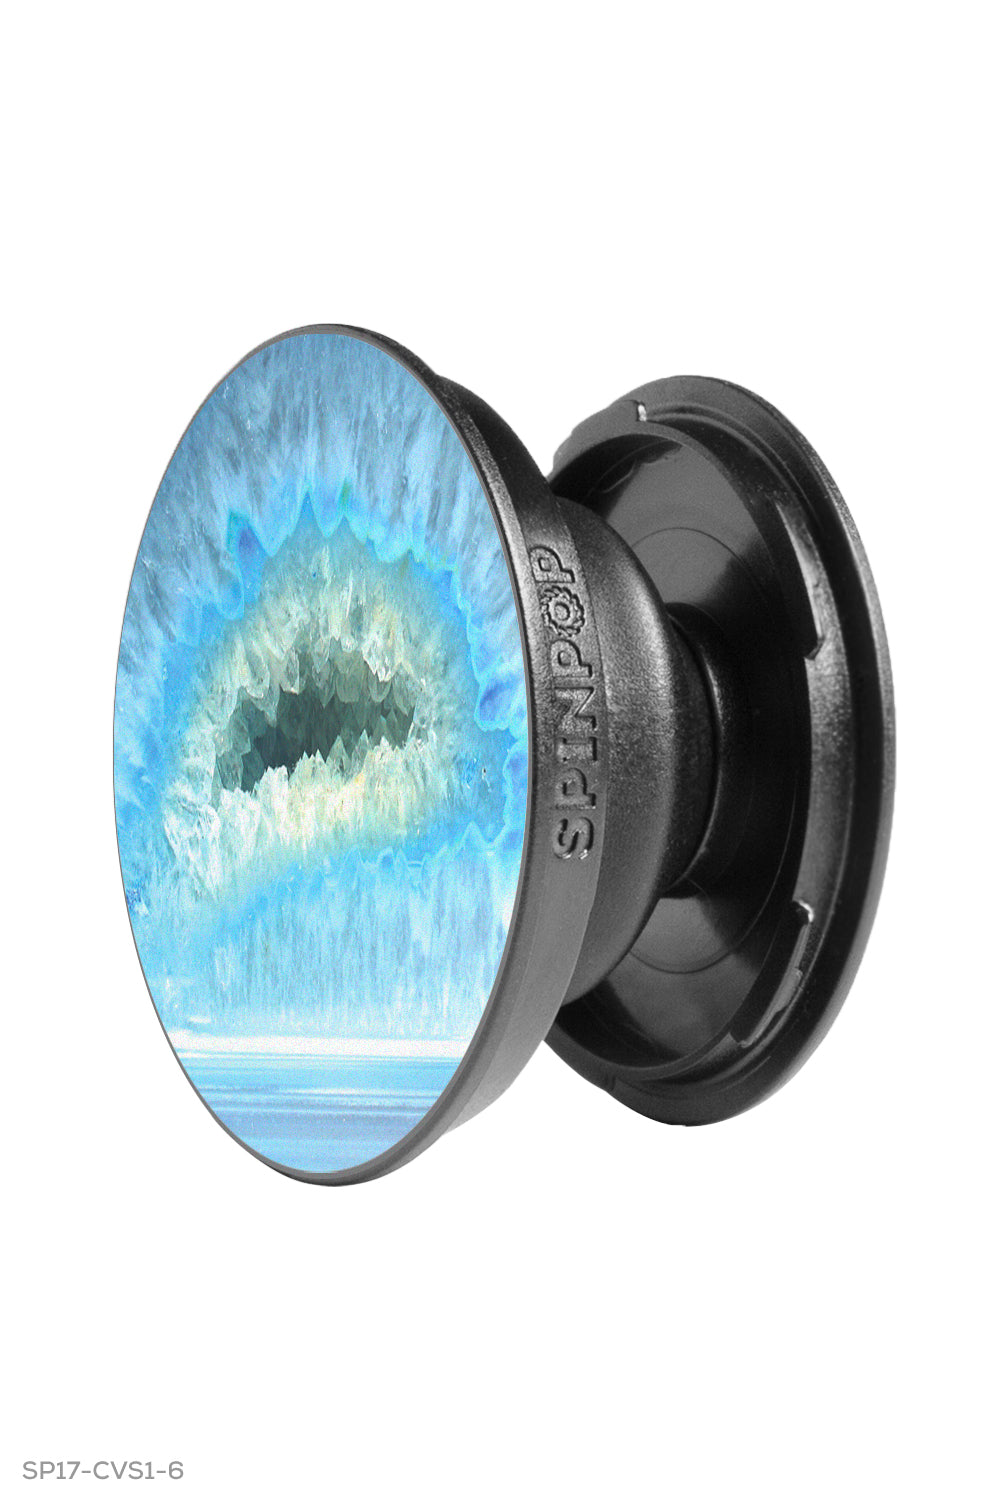 Spin Pop: Expanding Stand and Grip for Smartphones and Tablets - Geode Teal